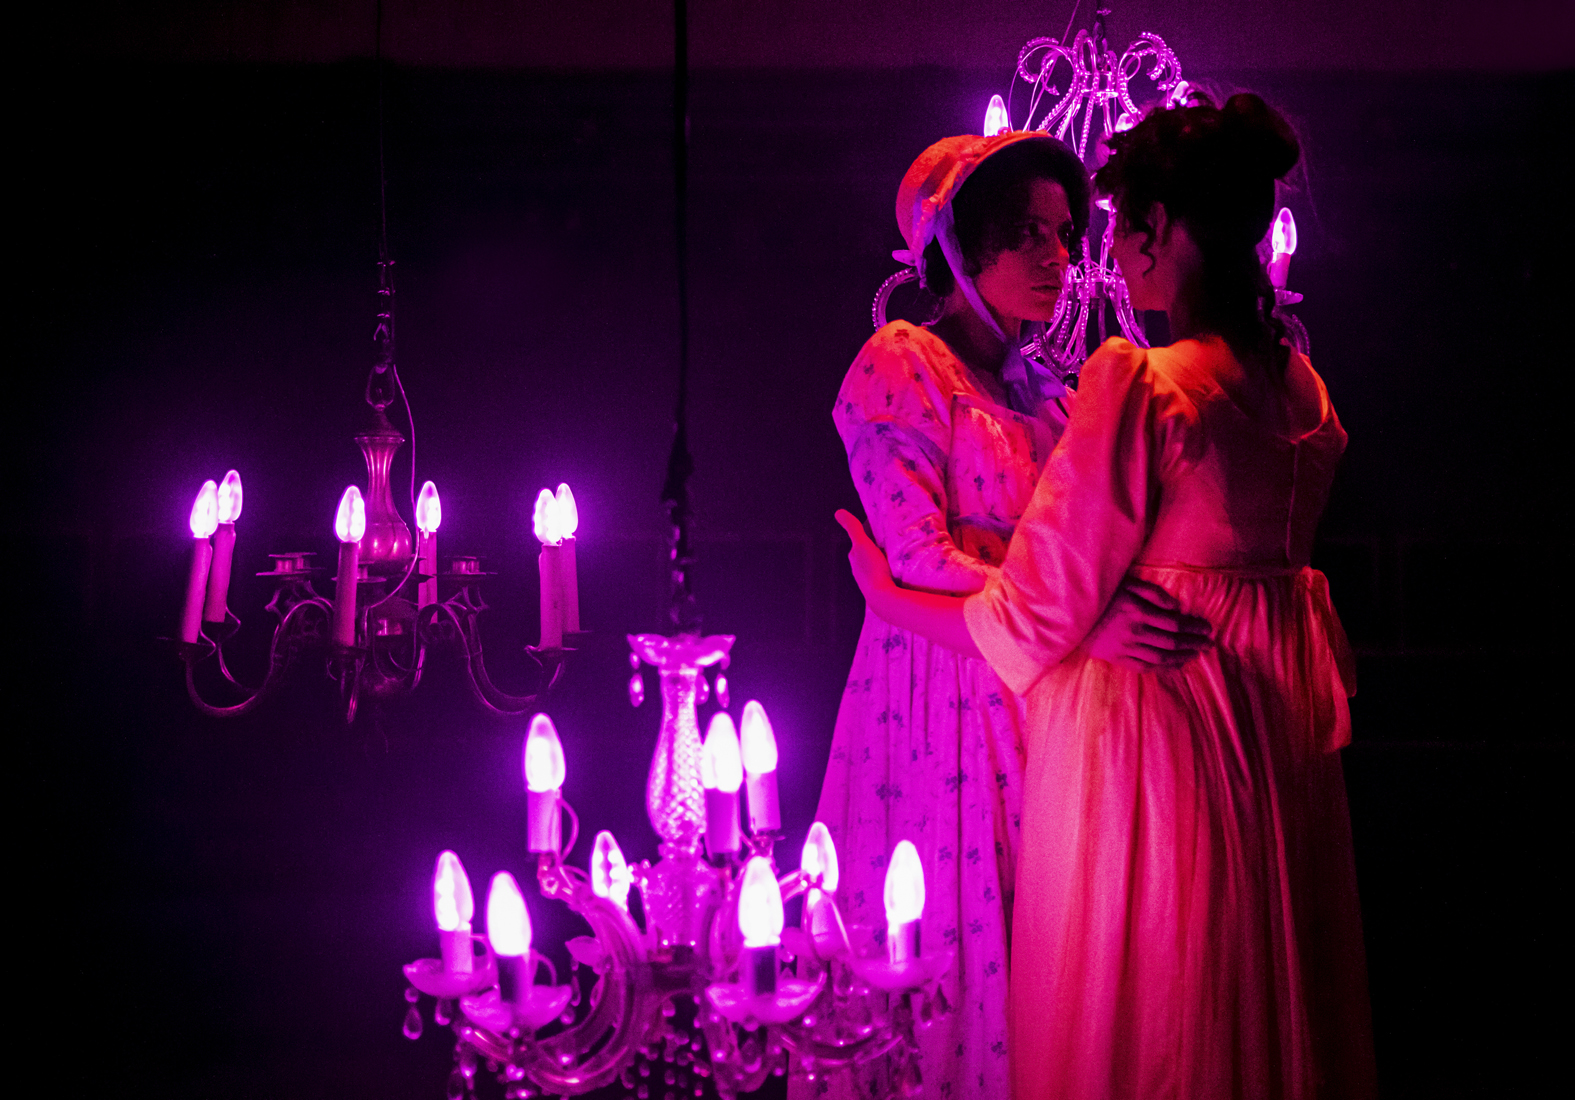 Two actors are hugging each other an dlooking into each others eyes. One is wearing a white dress with blue, floral print and a matching bonnet. The other is wearing a yellow dress. They are lit under a pink light and surrounding by lit chandeliers.